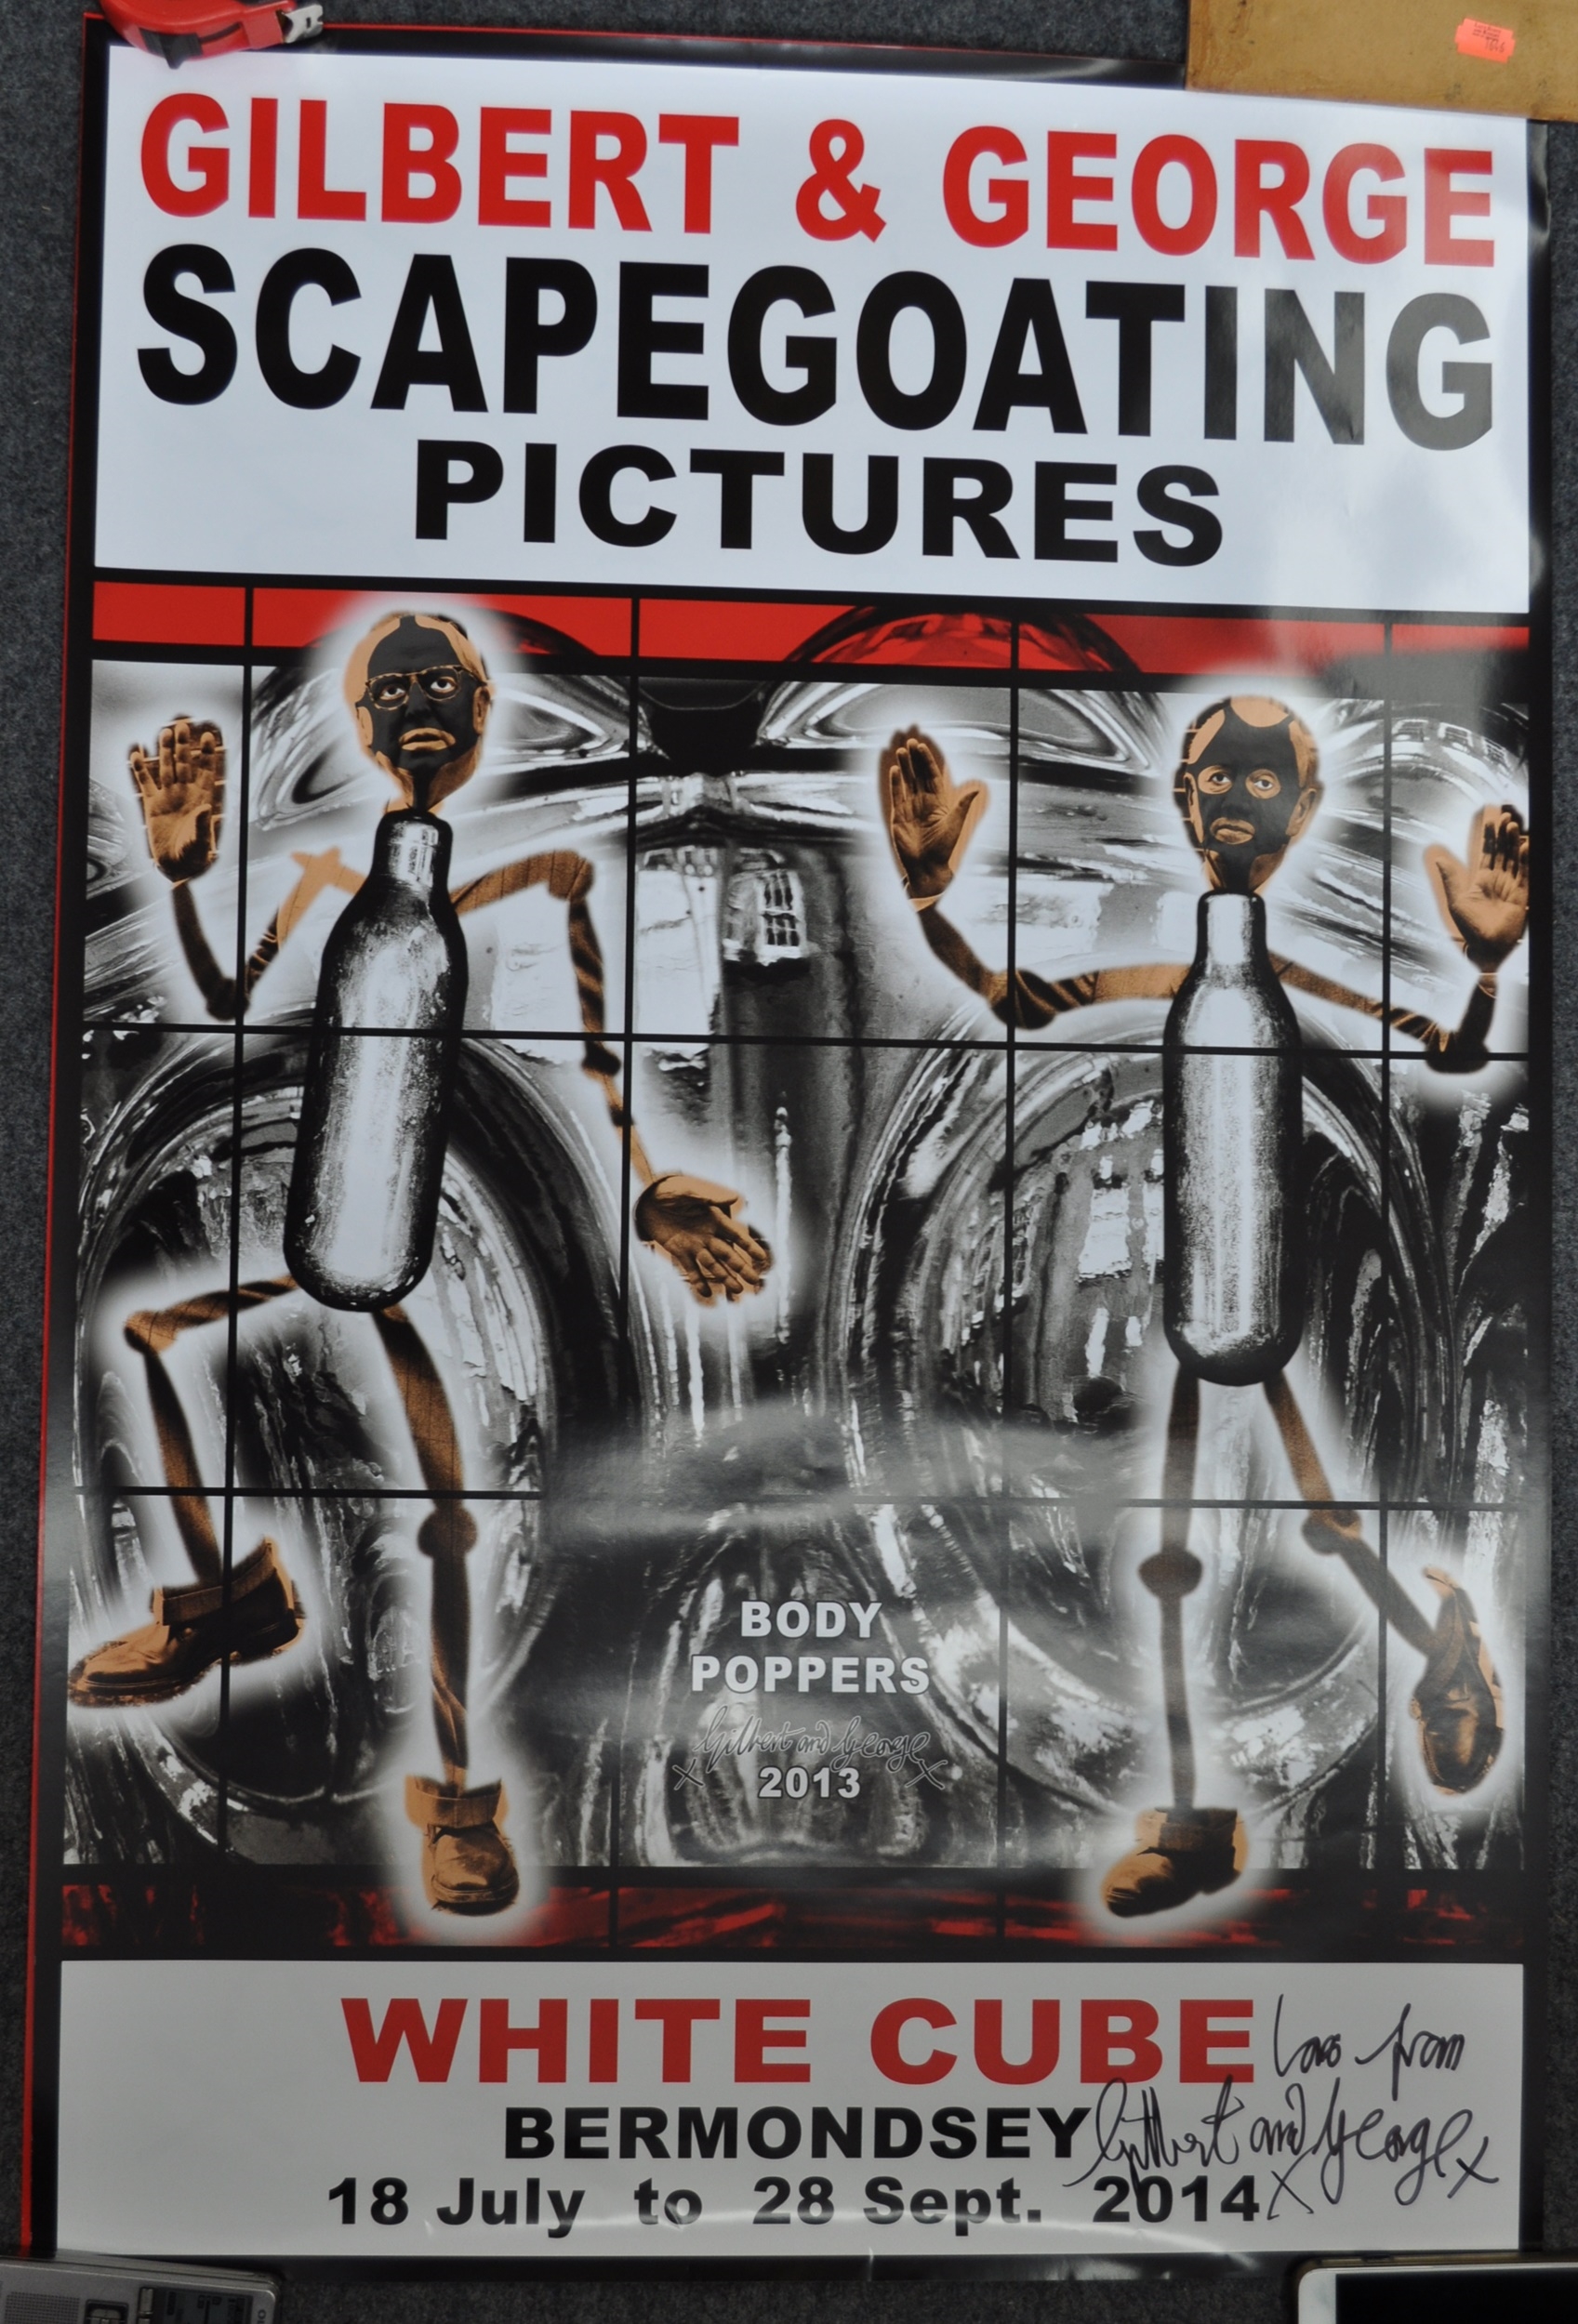 - Scapegoating Pictures for the White Cube Gallery by Gilbert & George, 2013